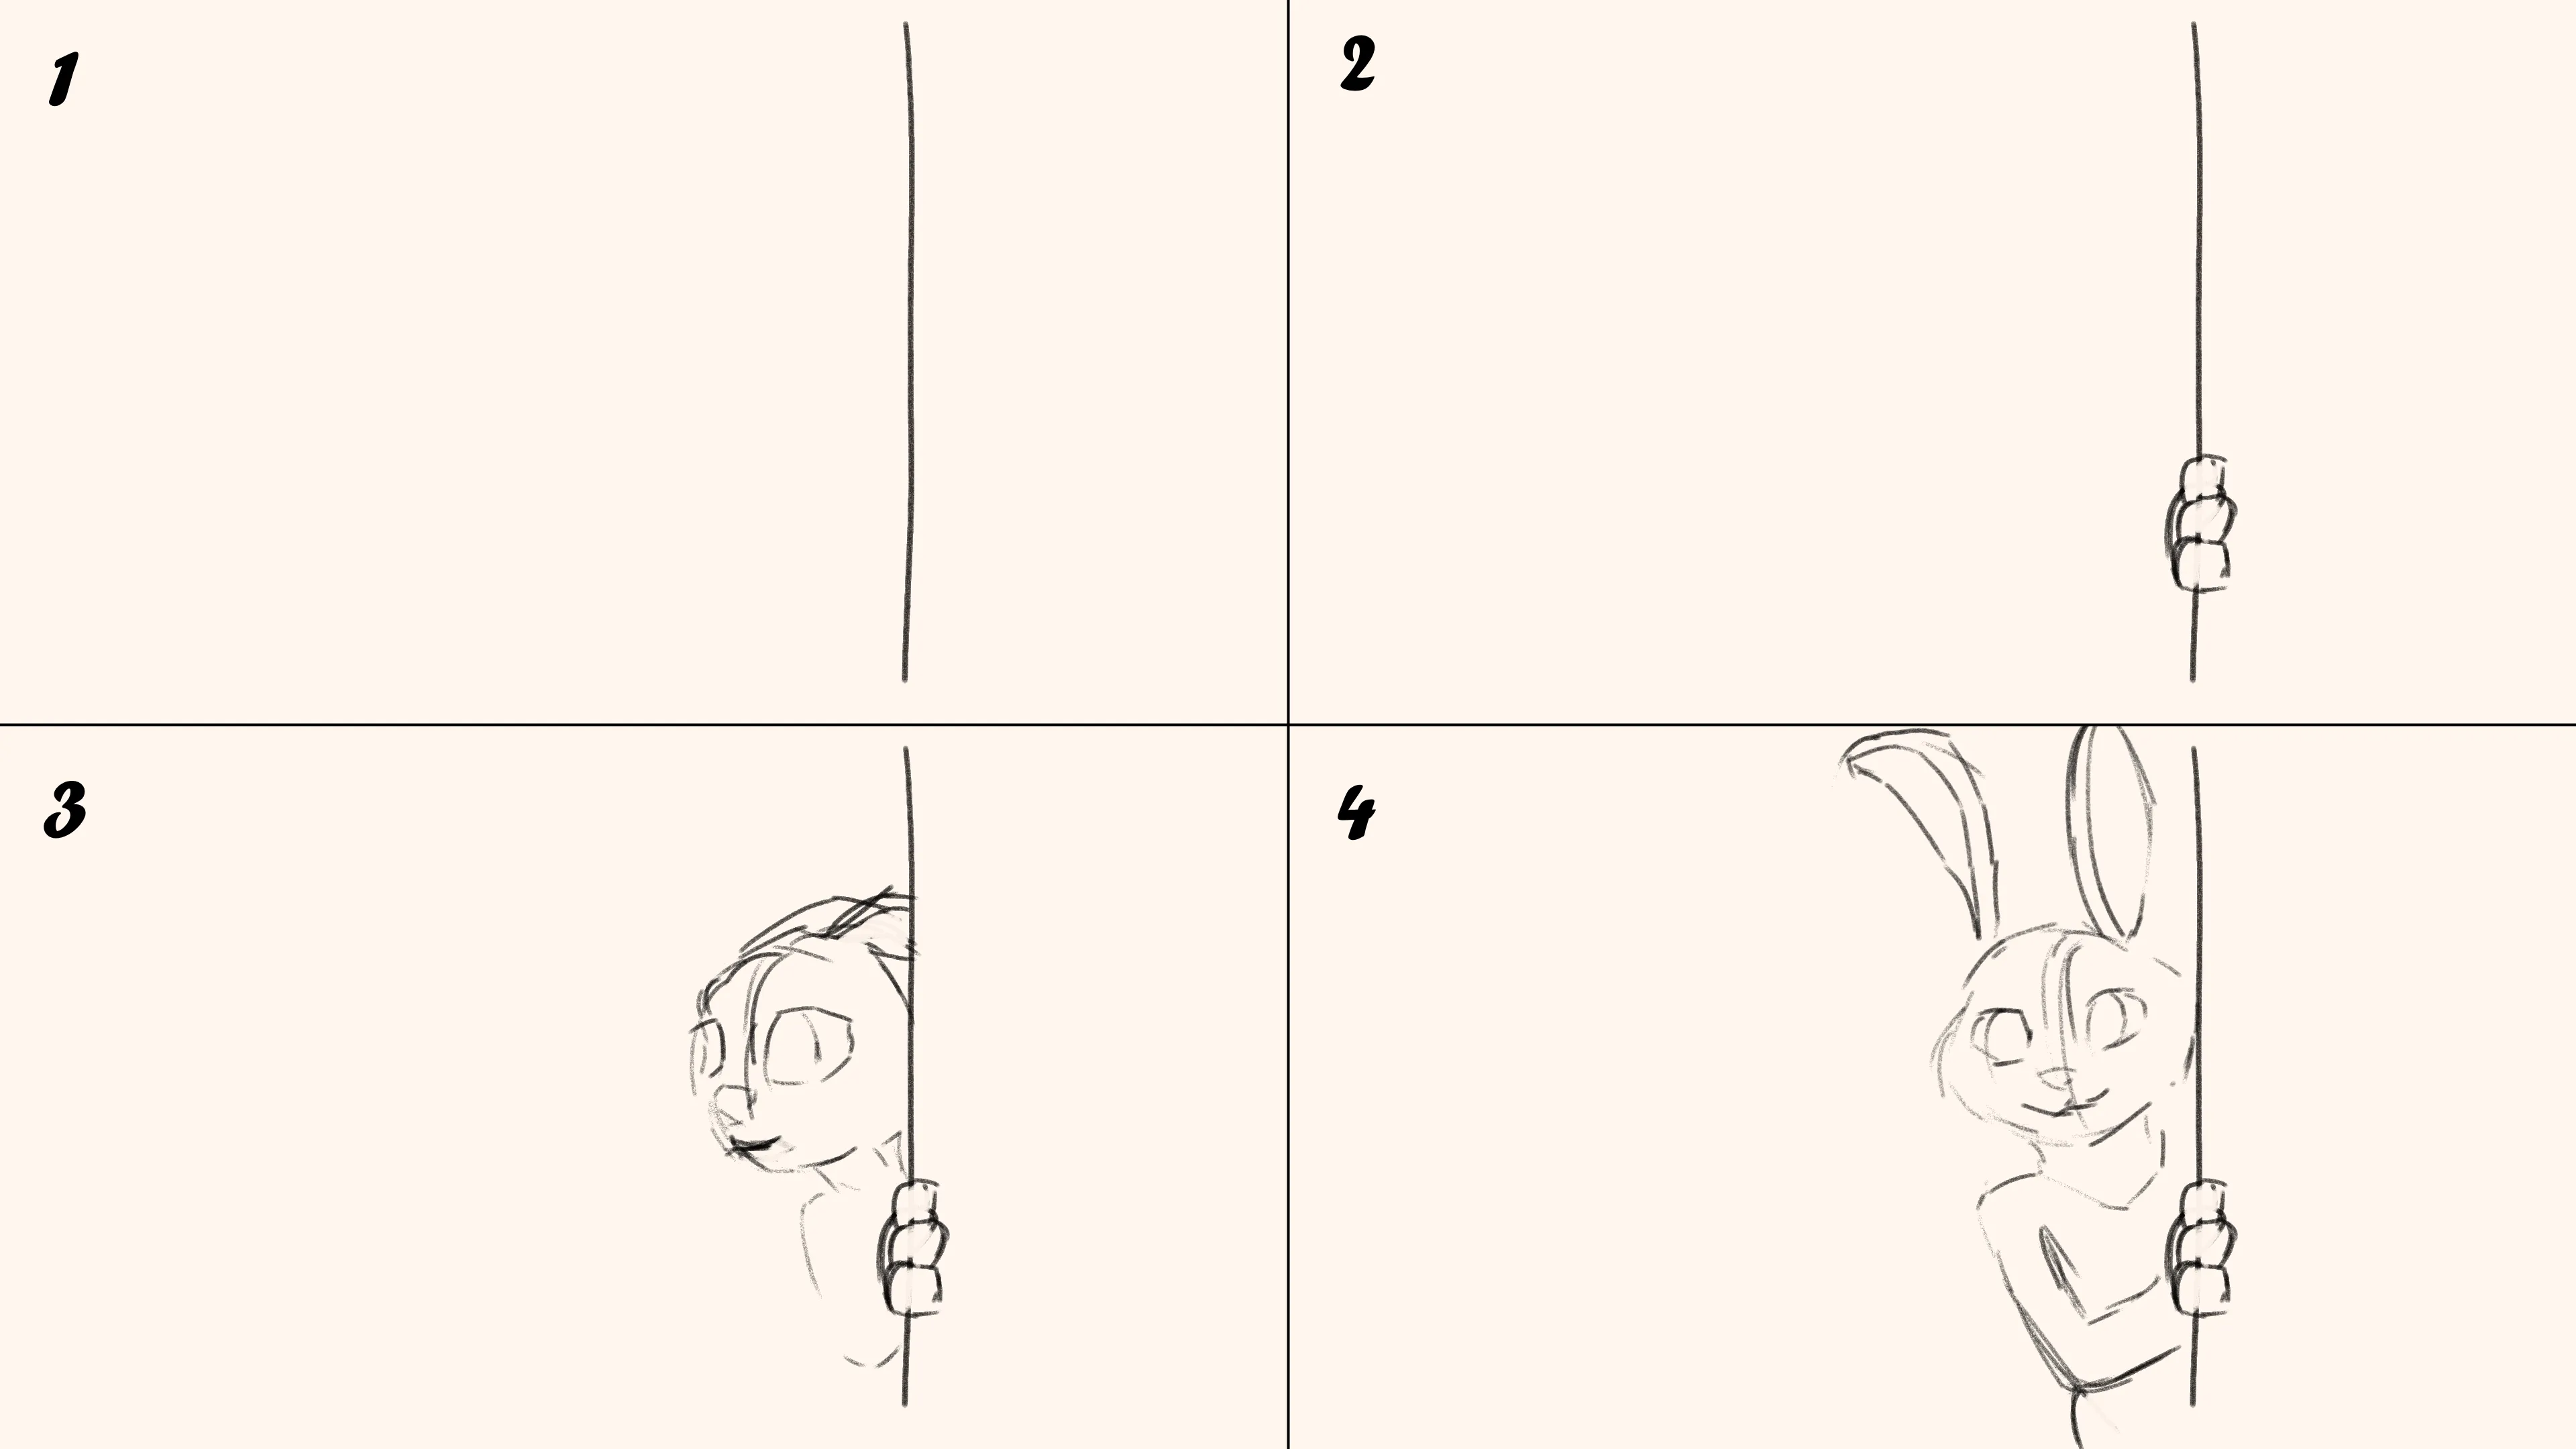 First four frames of the storyboard.